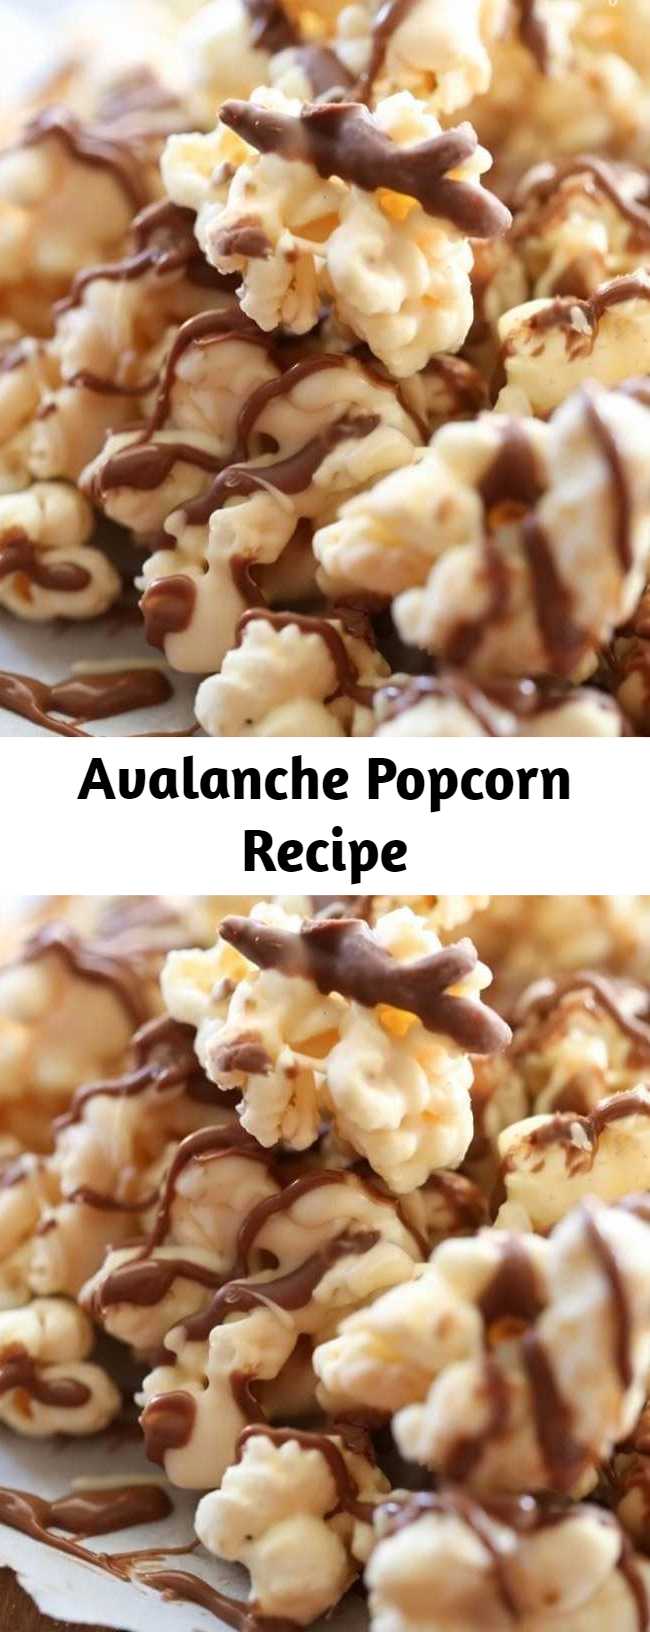 Avalanche Popcorn Recipe - A delicious and addictive snack! Just the right hint of peanut butter and chocolate to make this one popcorn recipe you will want to make over and over again! It is heavenly!